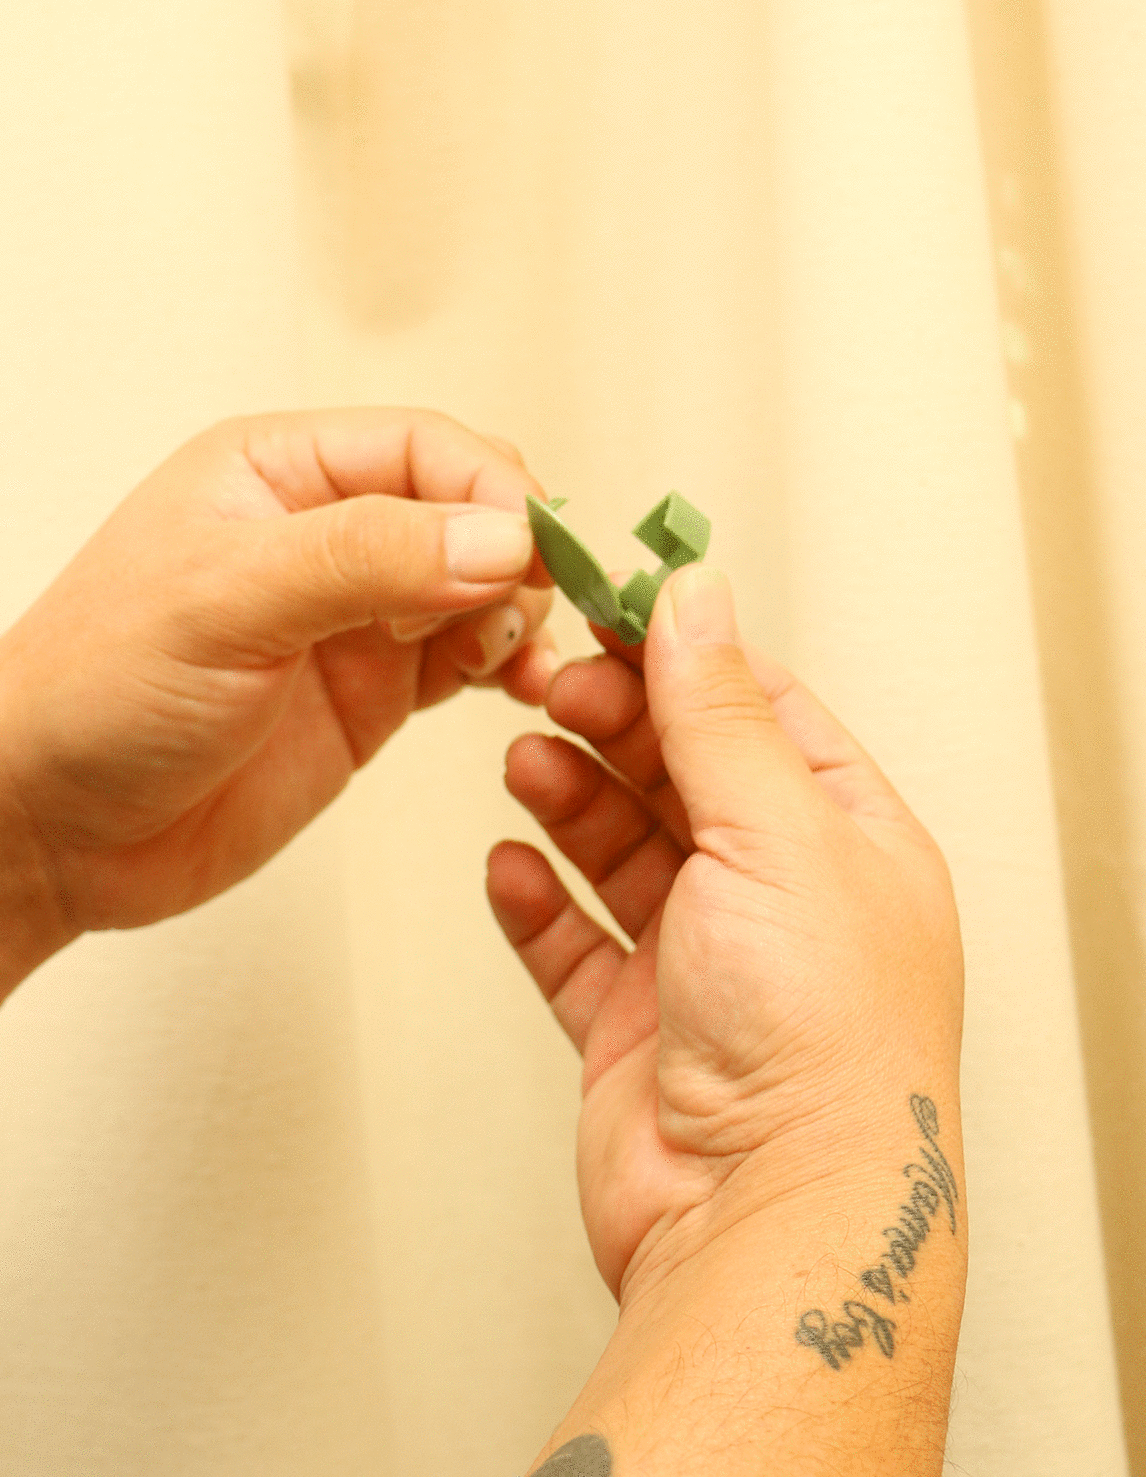 Hanging Plant Clips - Plantquility Houseplants 